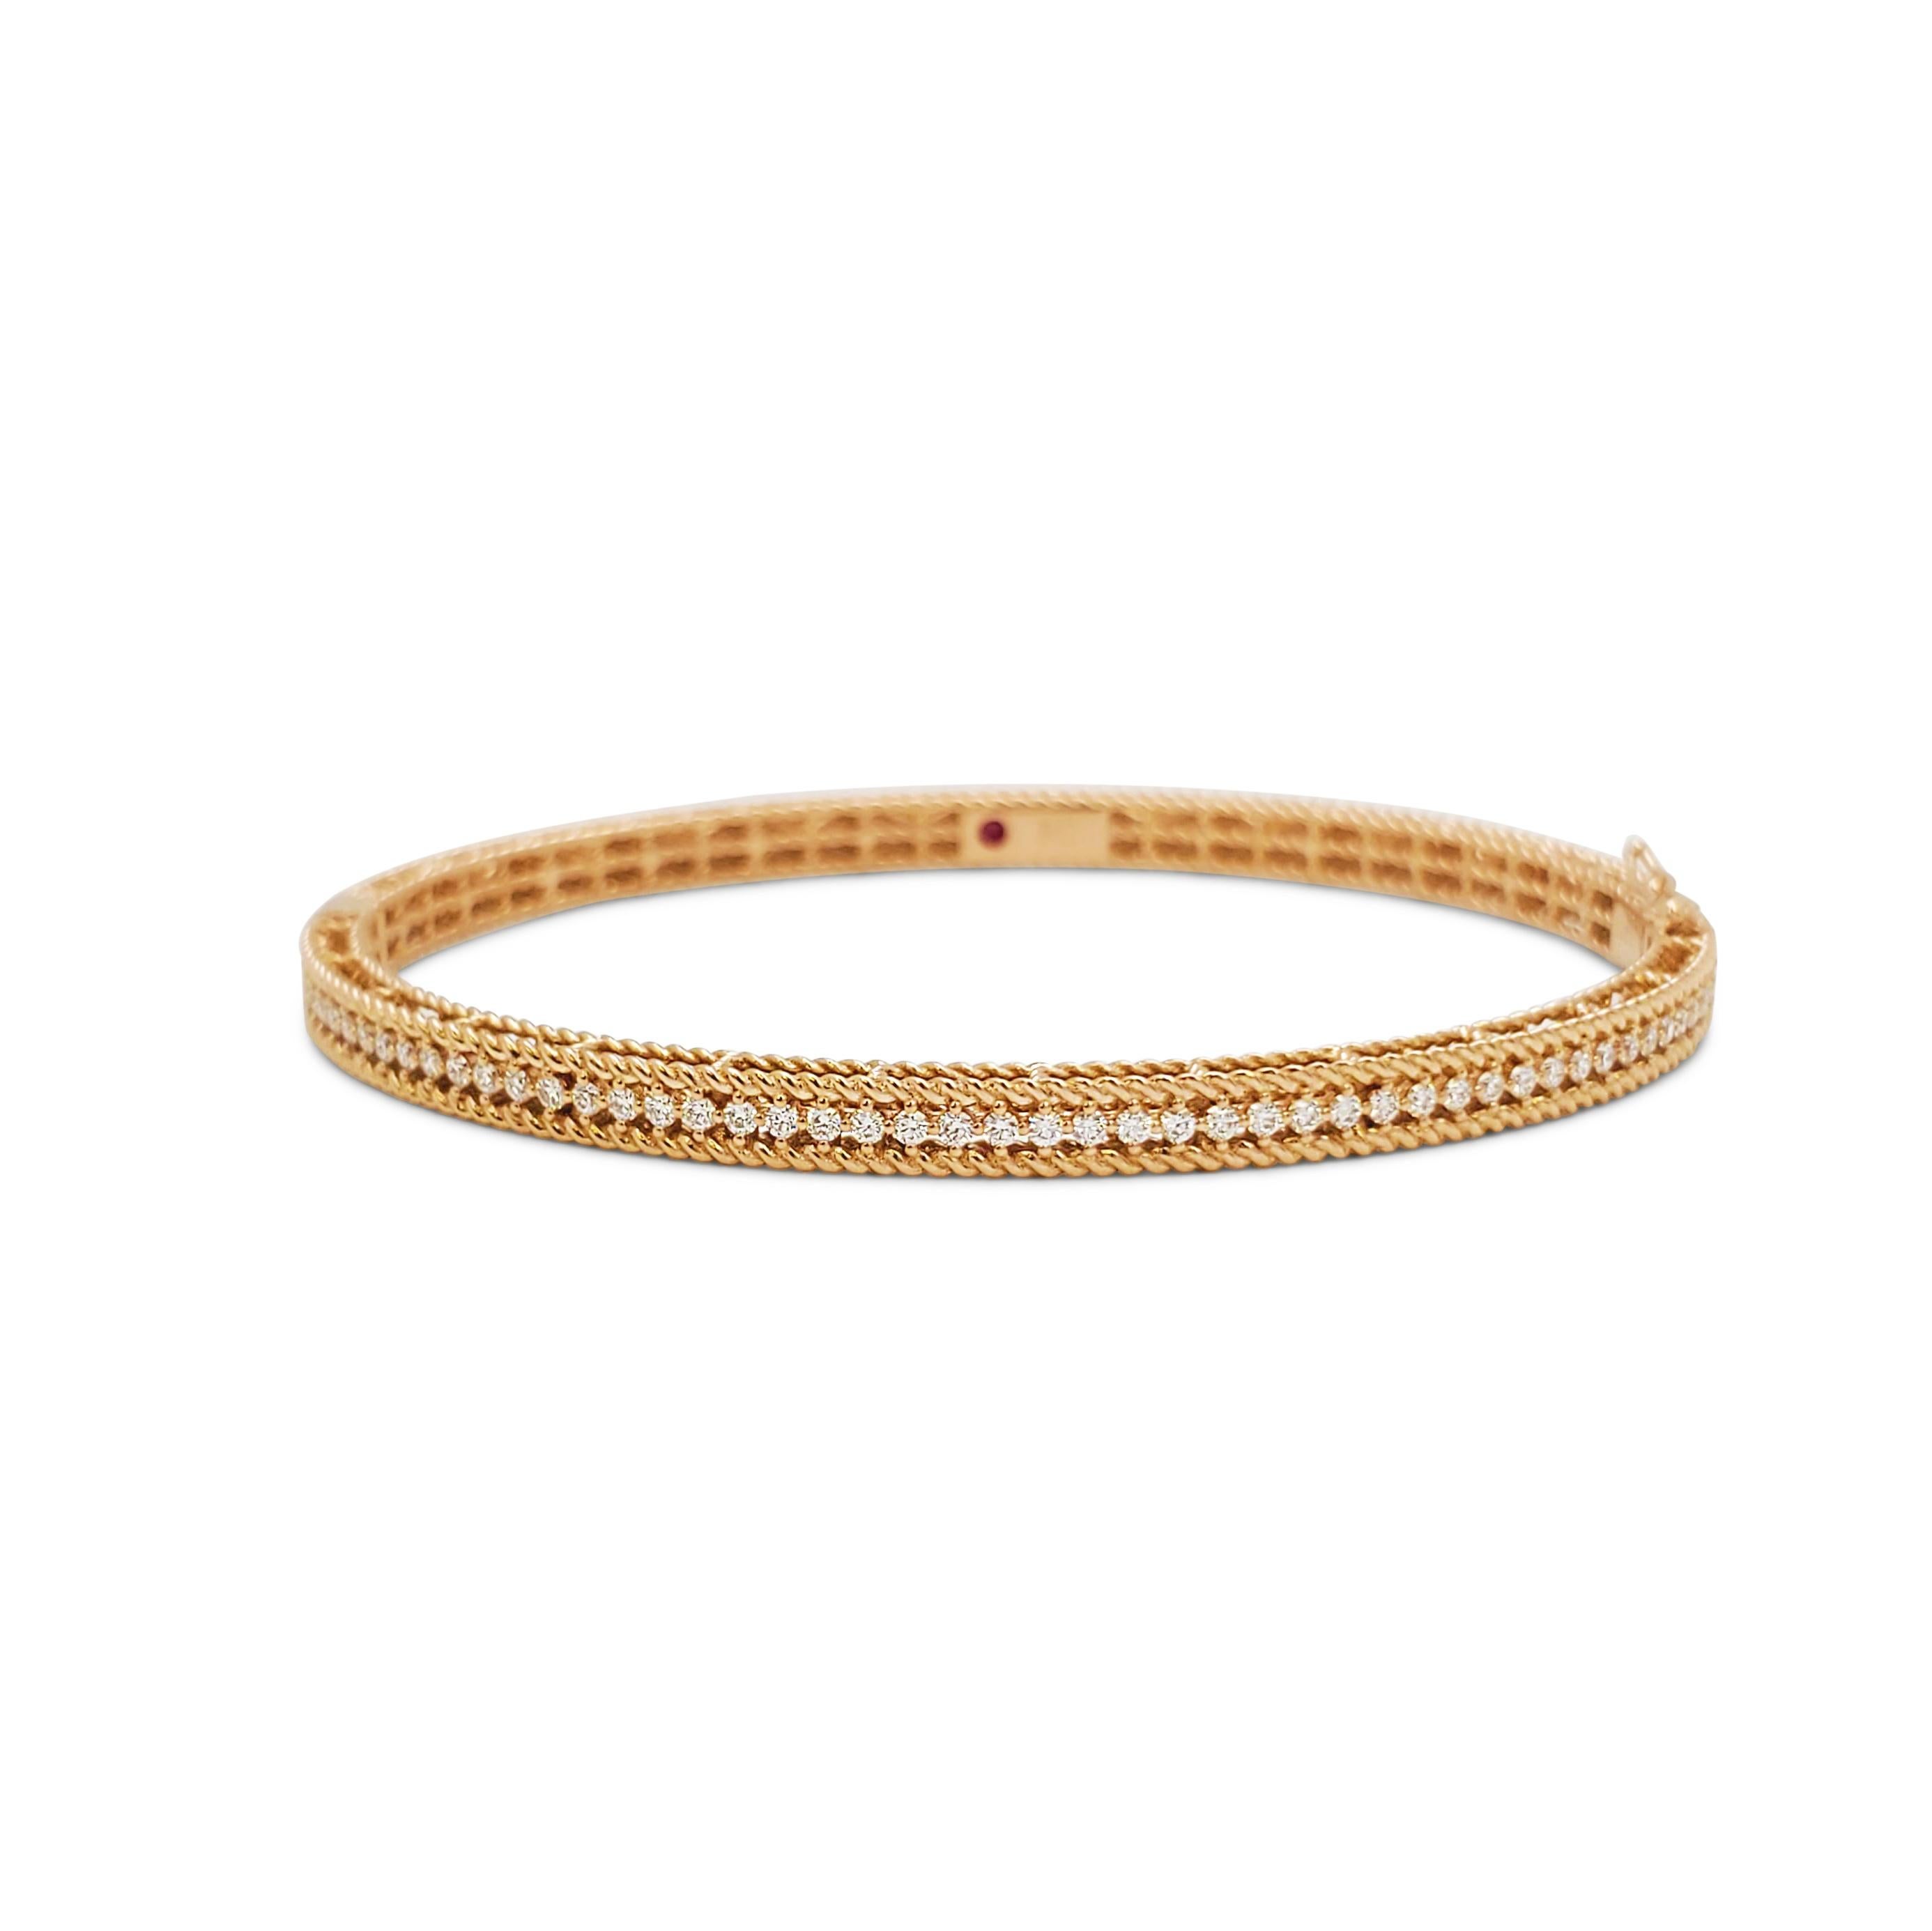 Authentic Roberto Coin Symphony Princess Rose Gold bracelet crafted in 18 karat rose gold.  One half of the bracelet is smooth high polished gold while the other half features an estimated .61 total carats of glittering round brilliant diamonds set